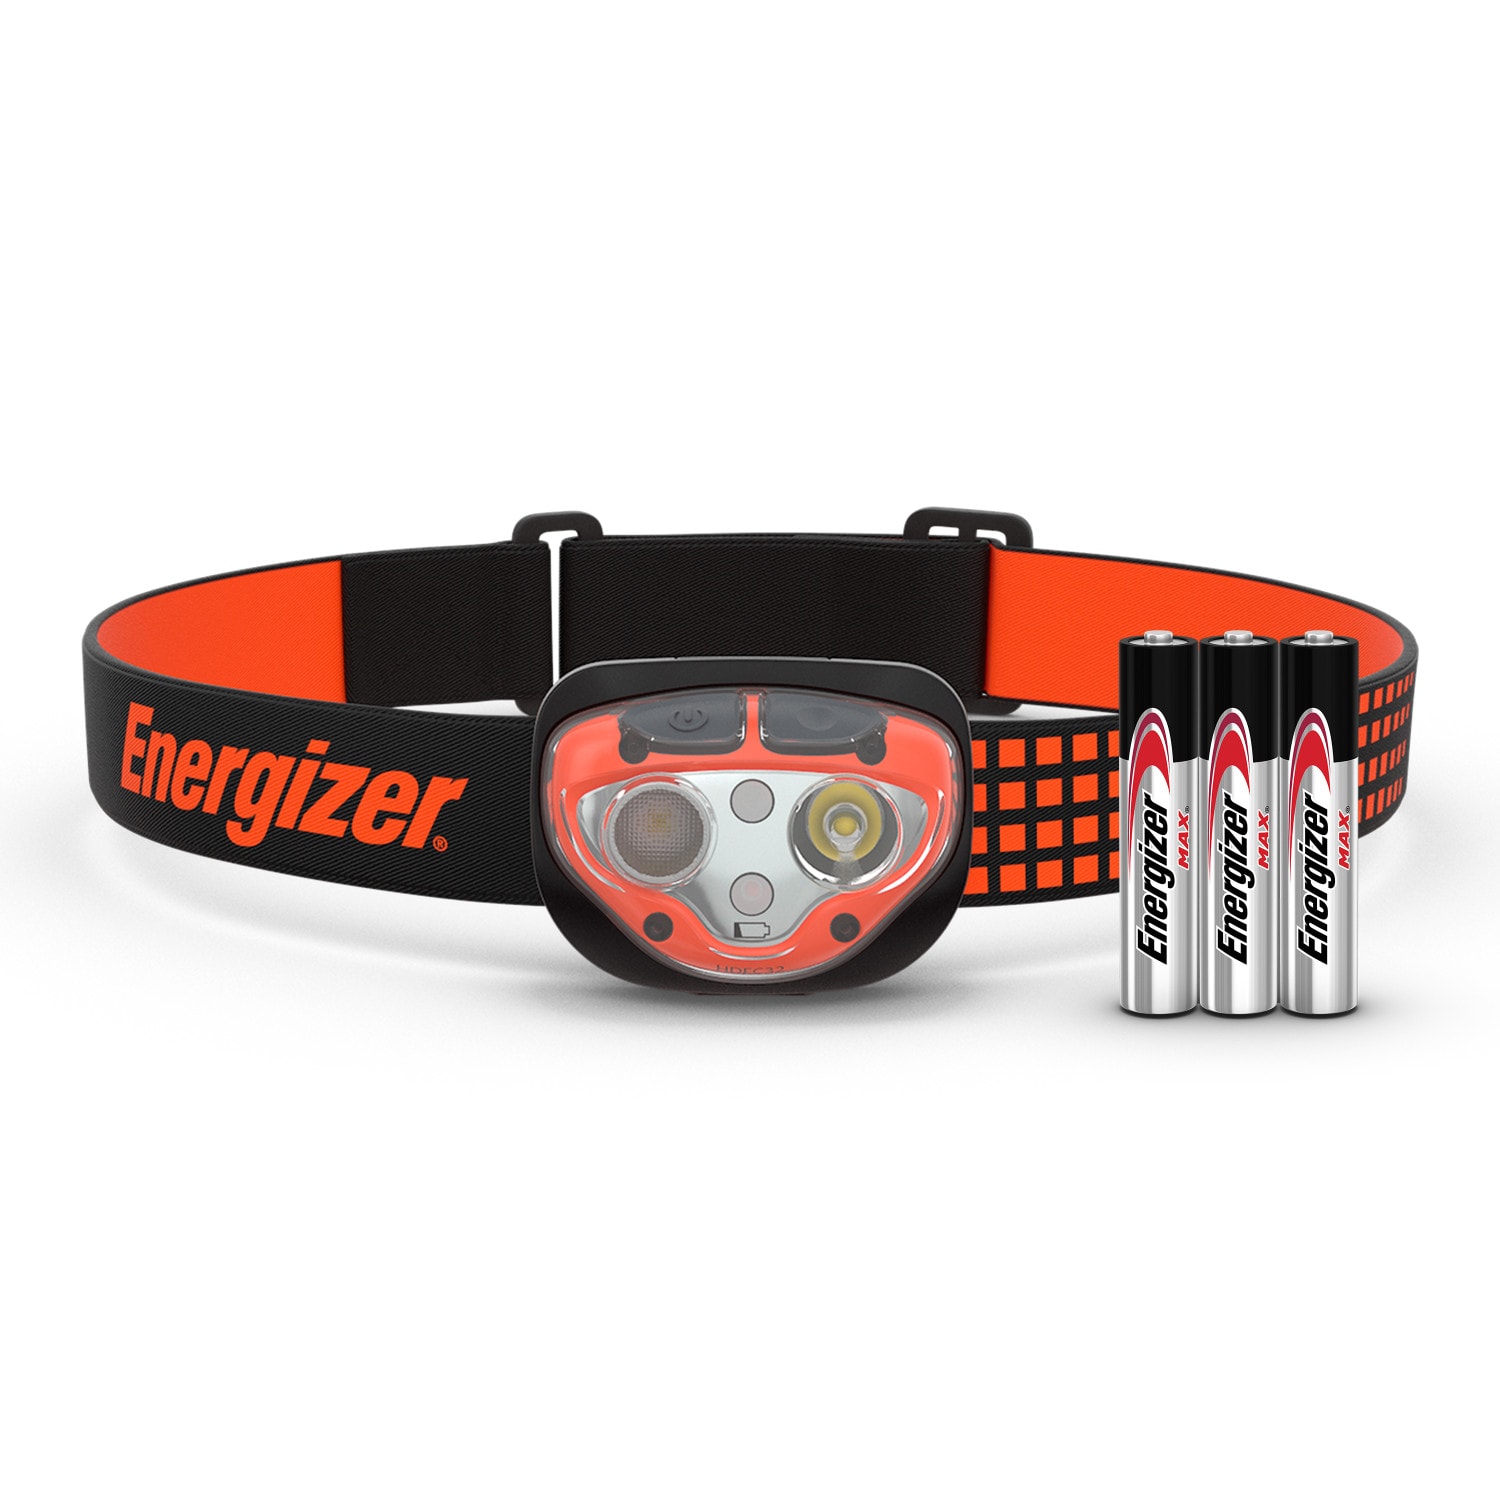 Energizer Vision 450-Lumen LED the Headlamp Included) Headlamps in (Battery department at